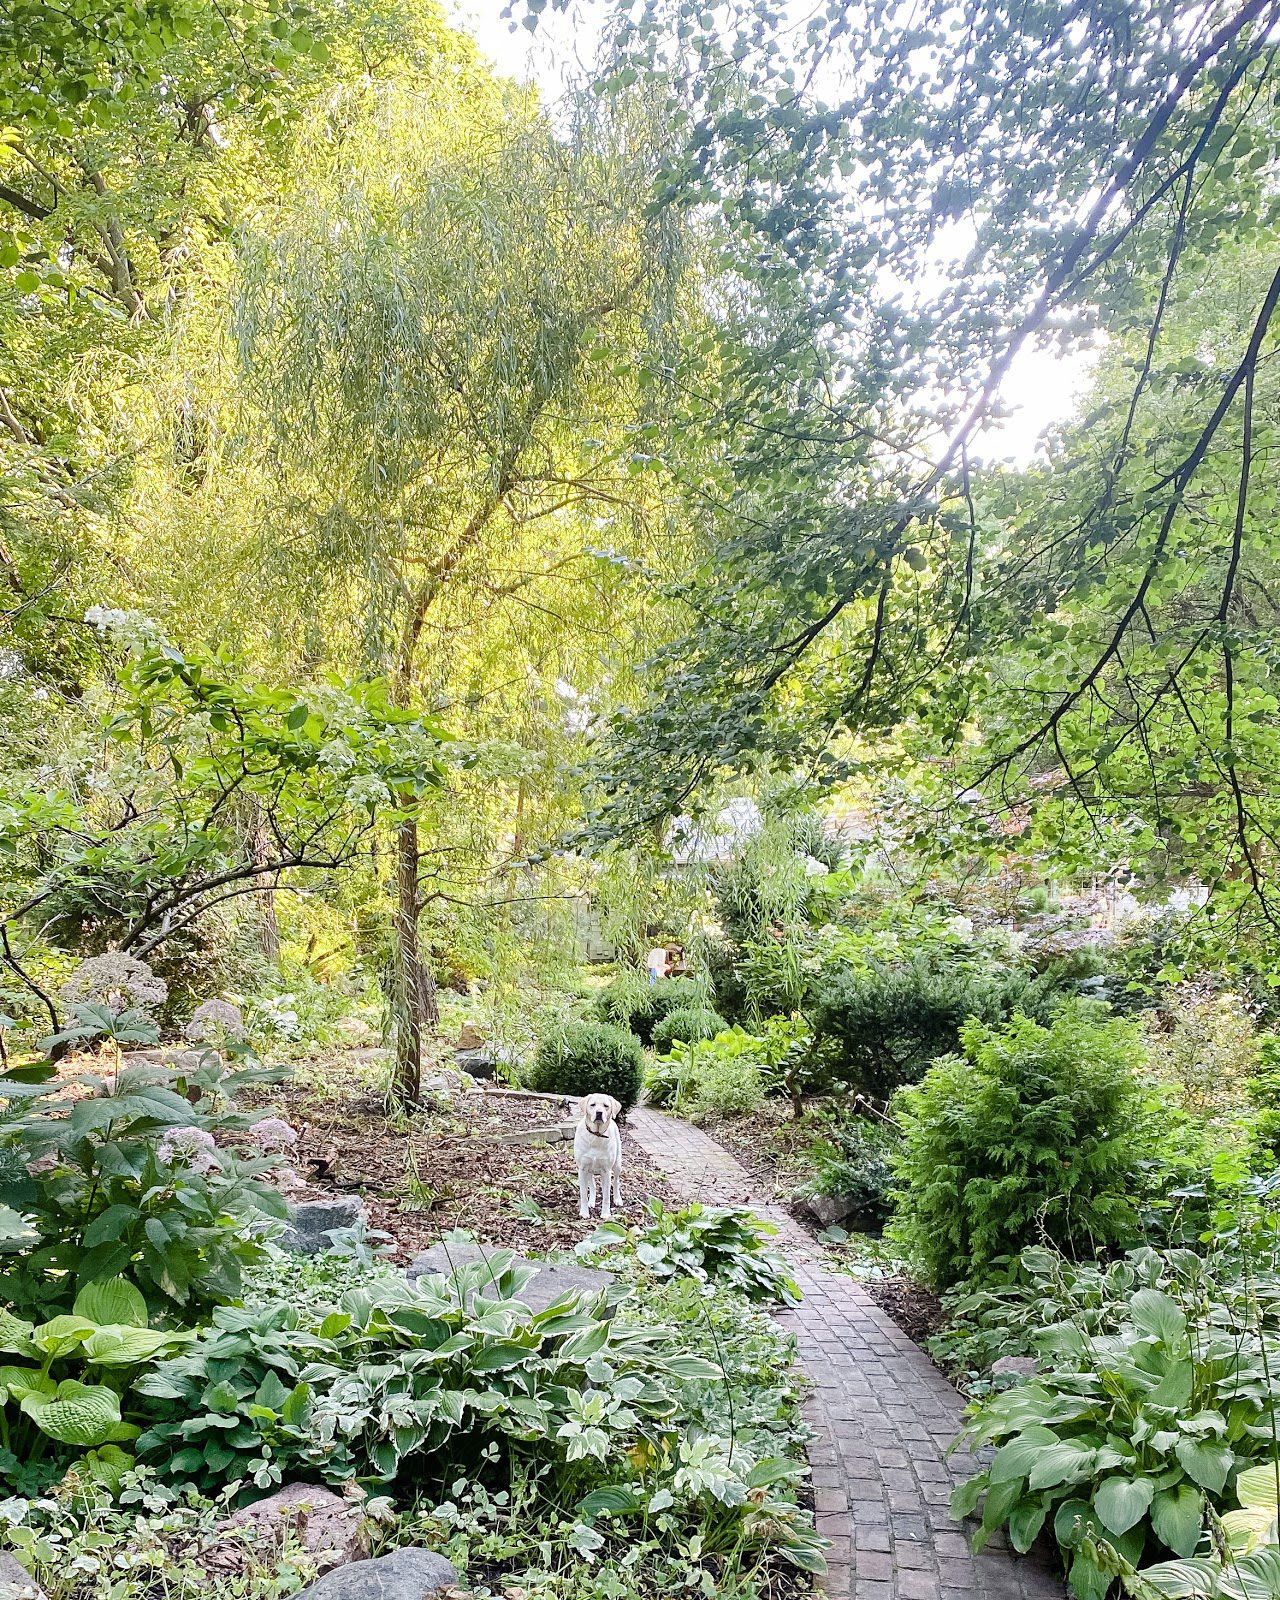 A lush, green backyard garden in peak growing season with a dog standing in the middle.